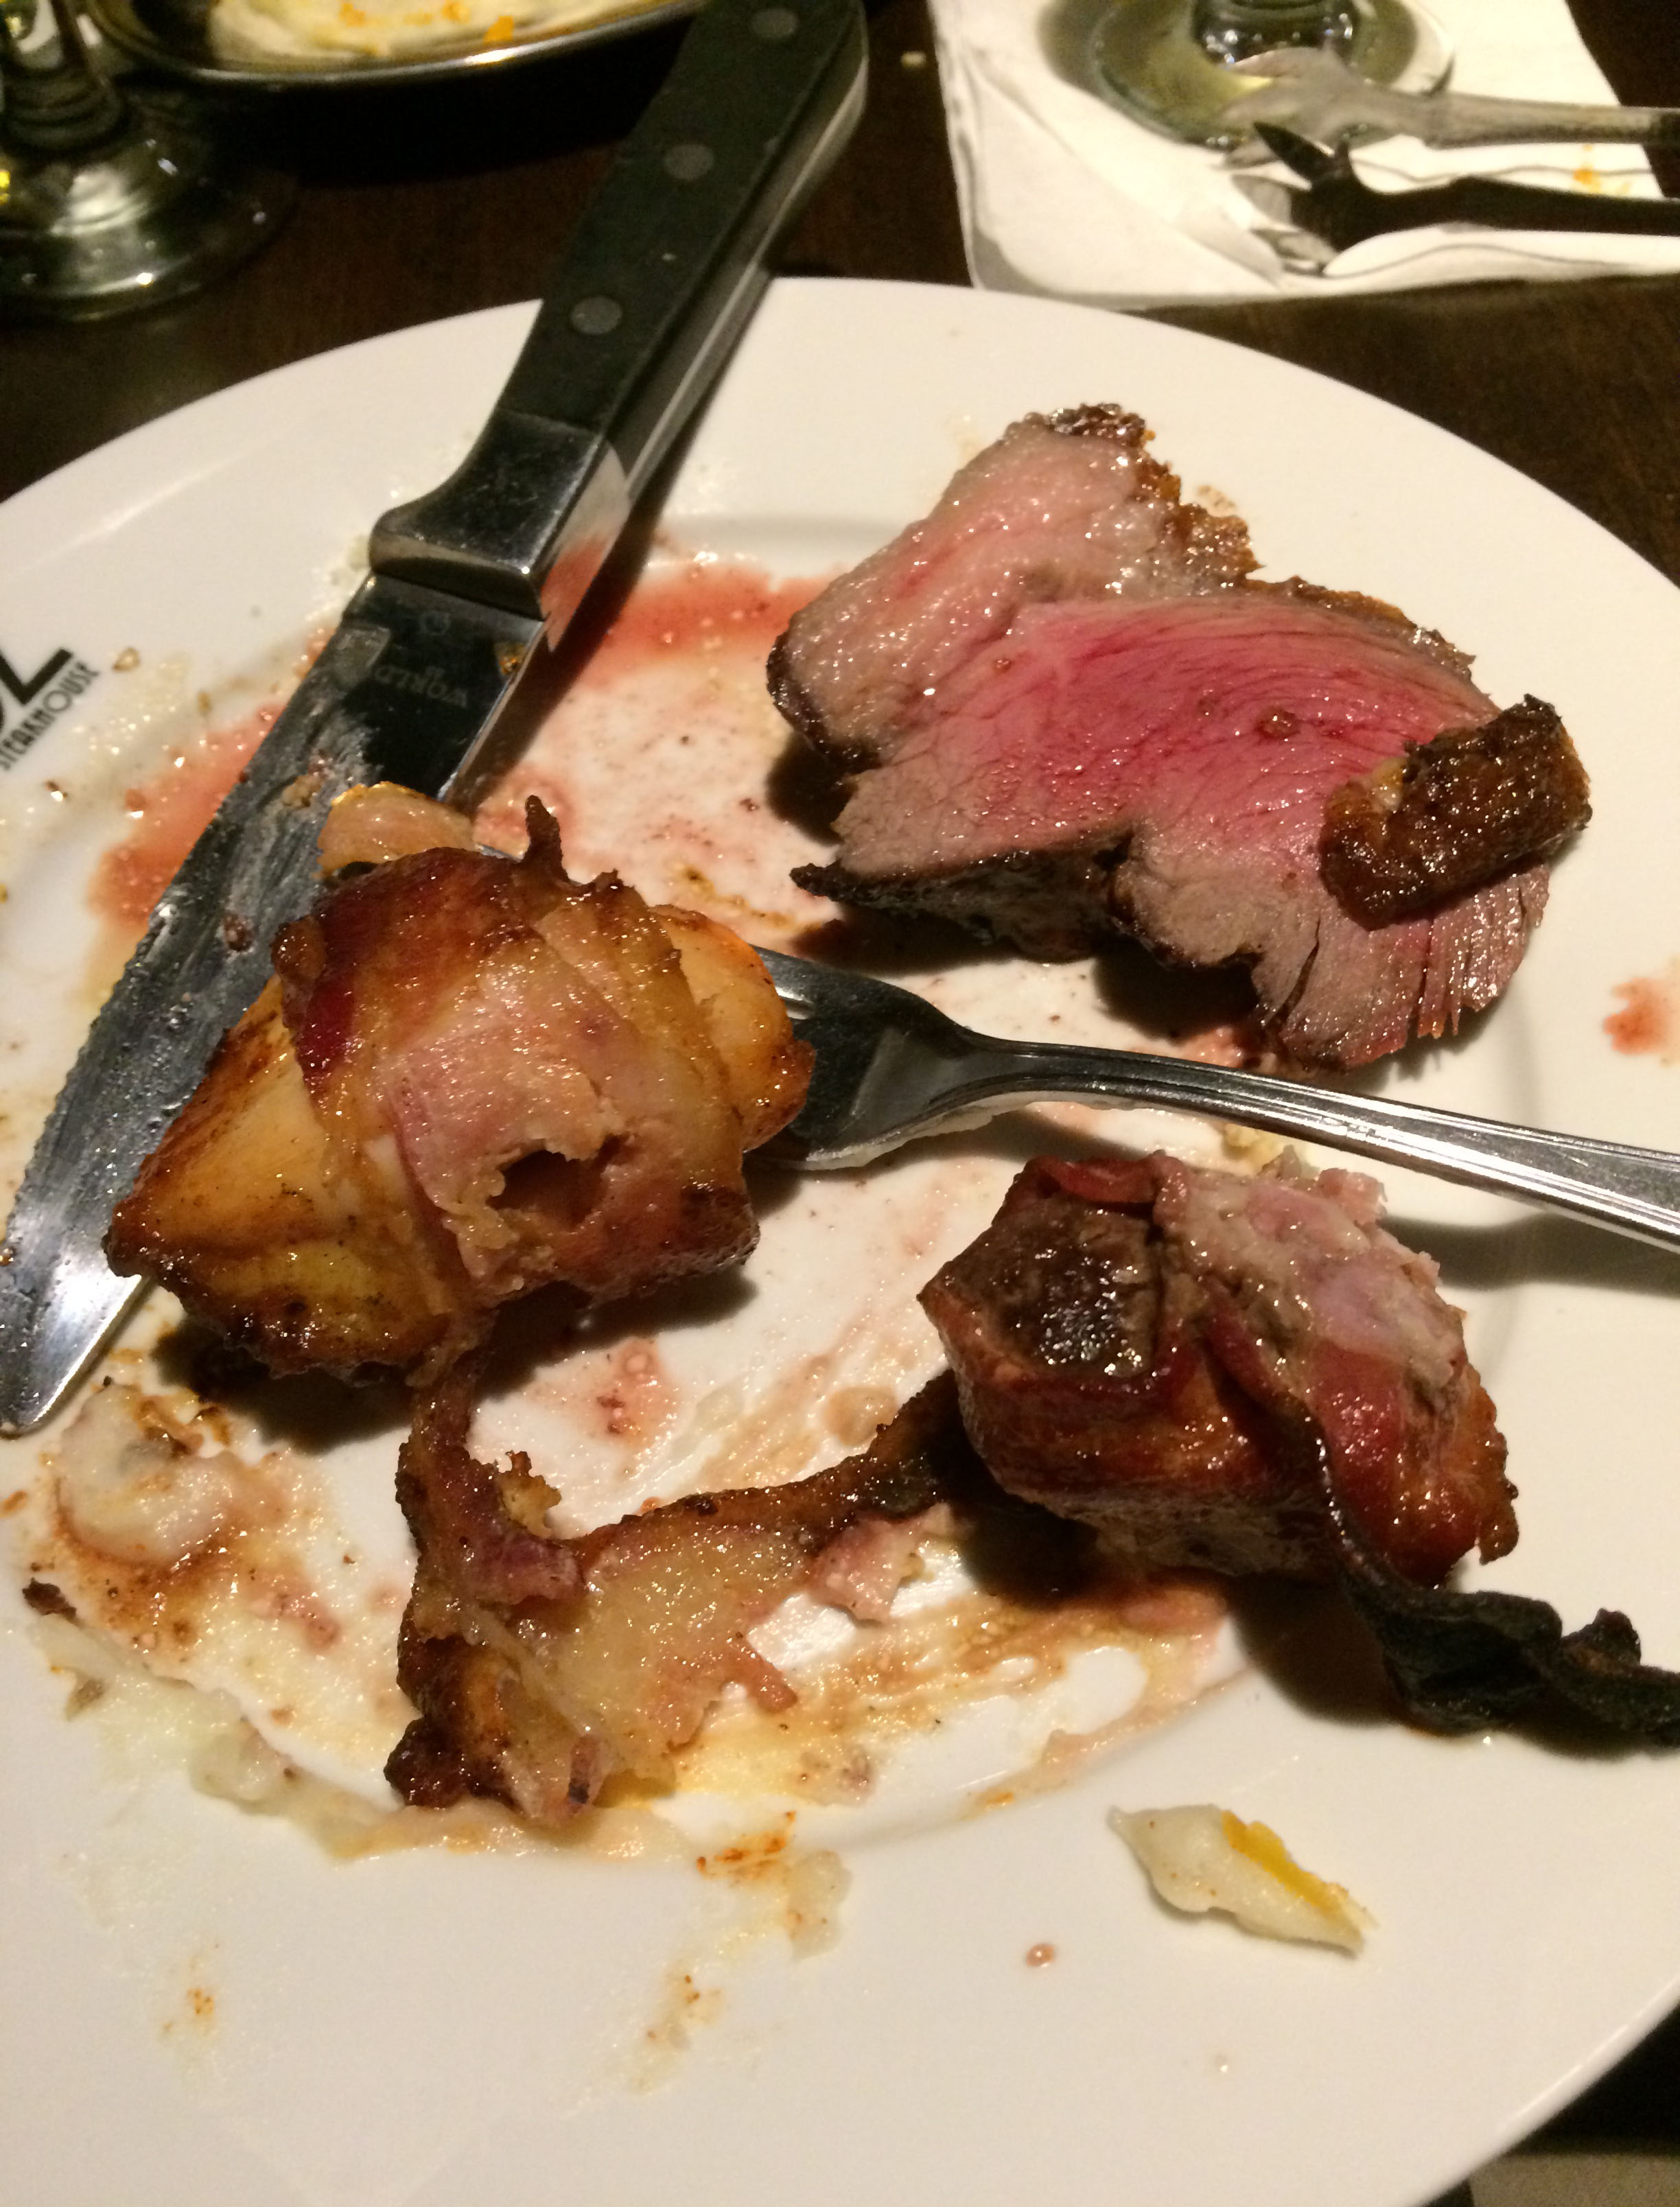 This was my second round of meat at Rioz.